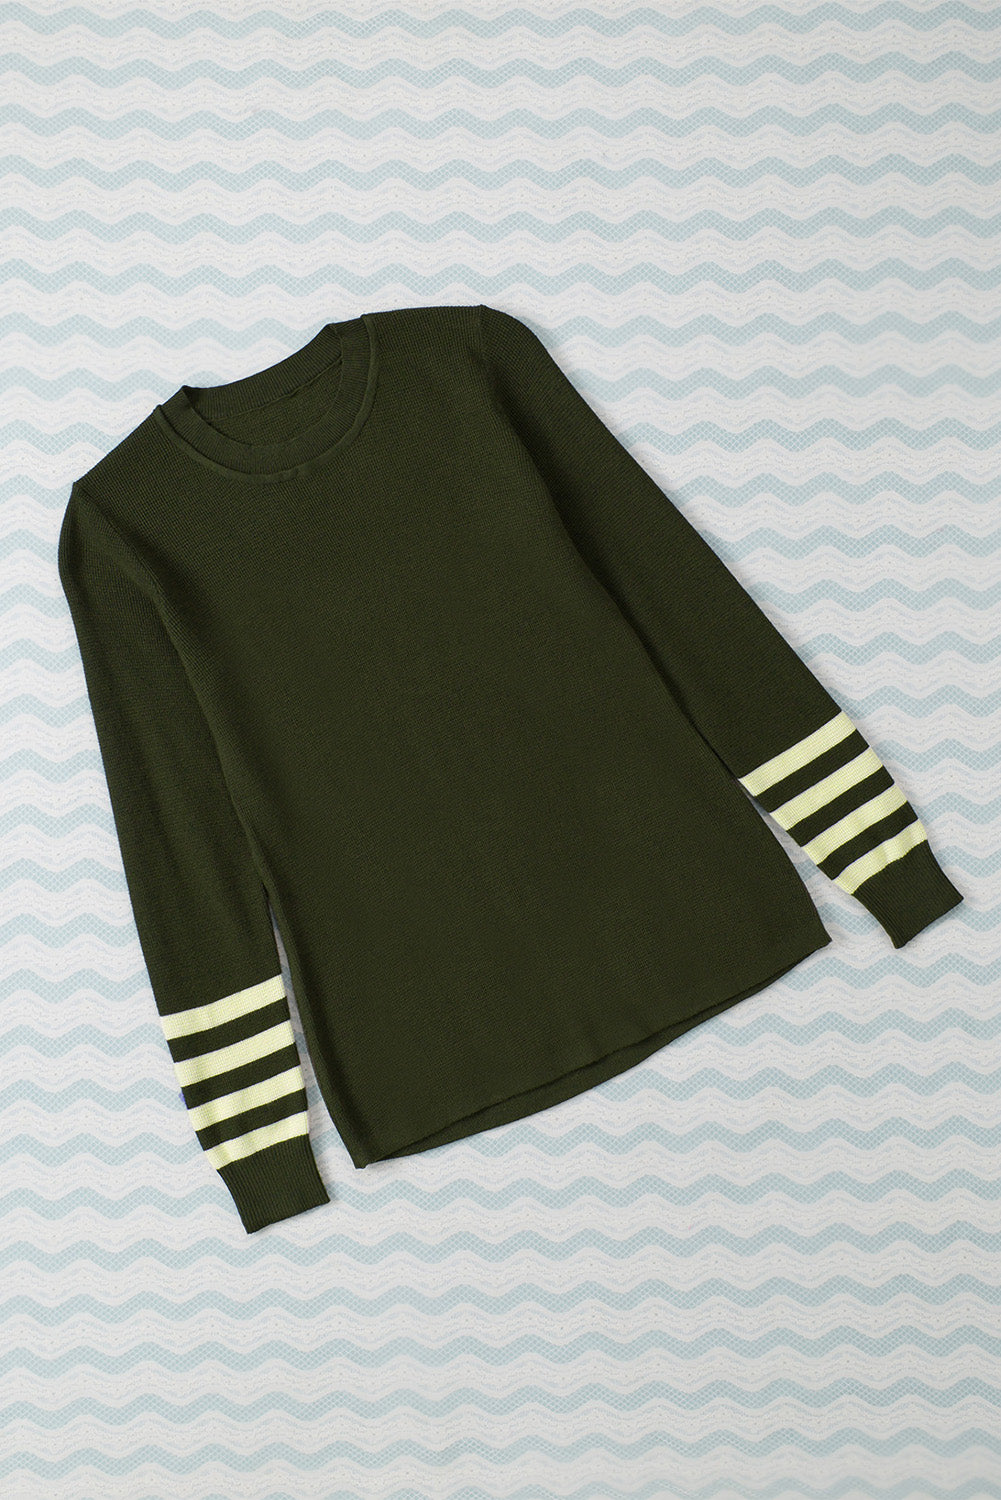 Striped Sleeve Plain Knit Sweater - 5 colors - women's sweater at TFC&H Co.